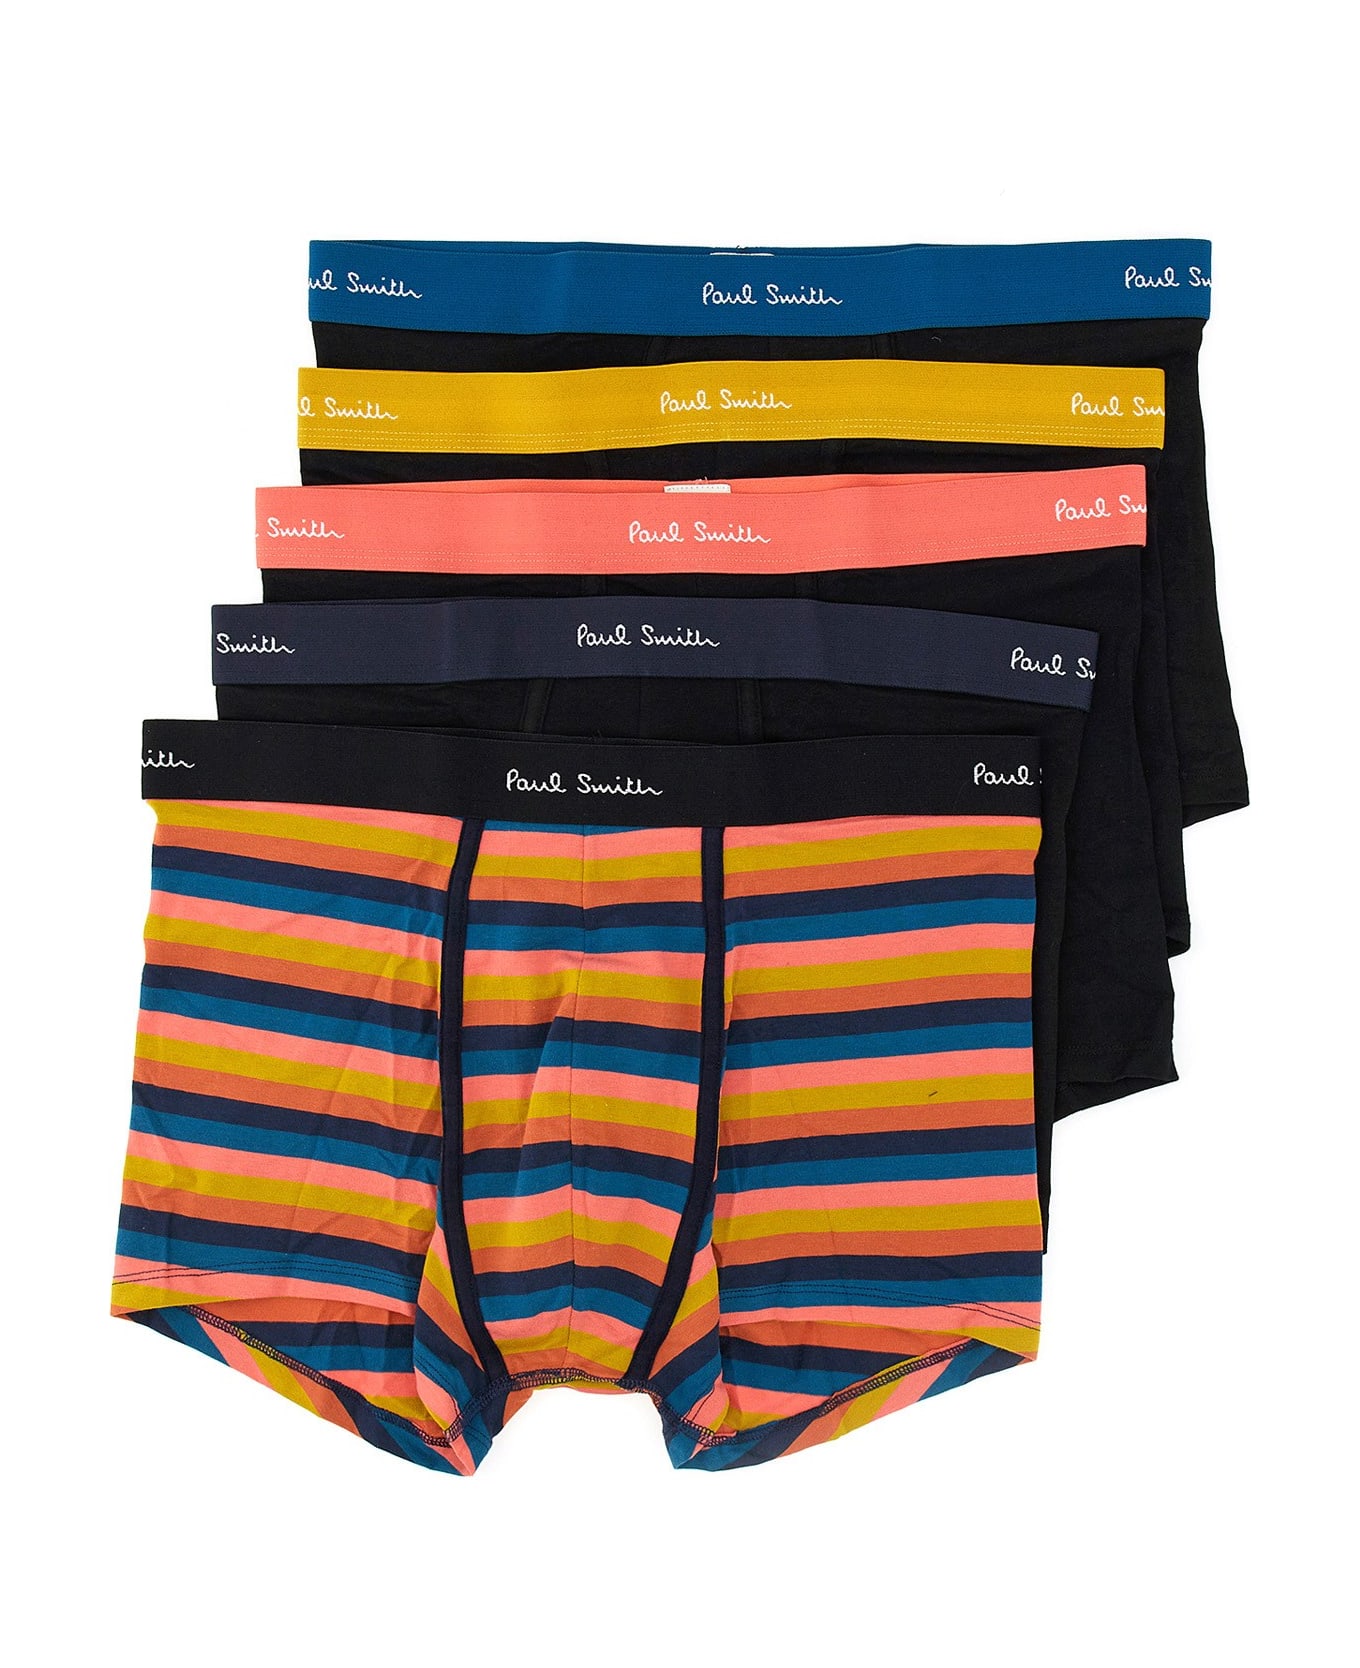 Paul Smith Pack Of Five Boxer Shorts - Black